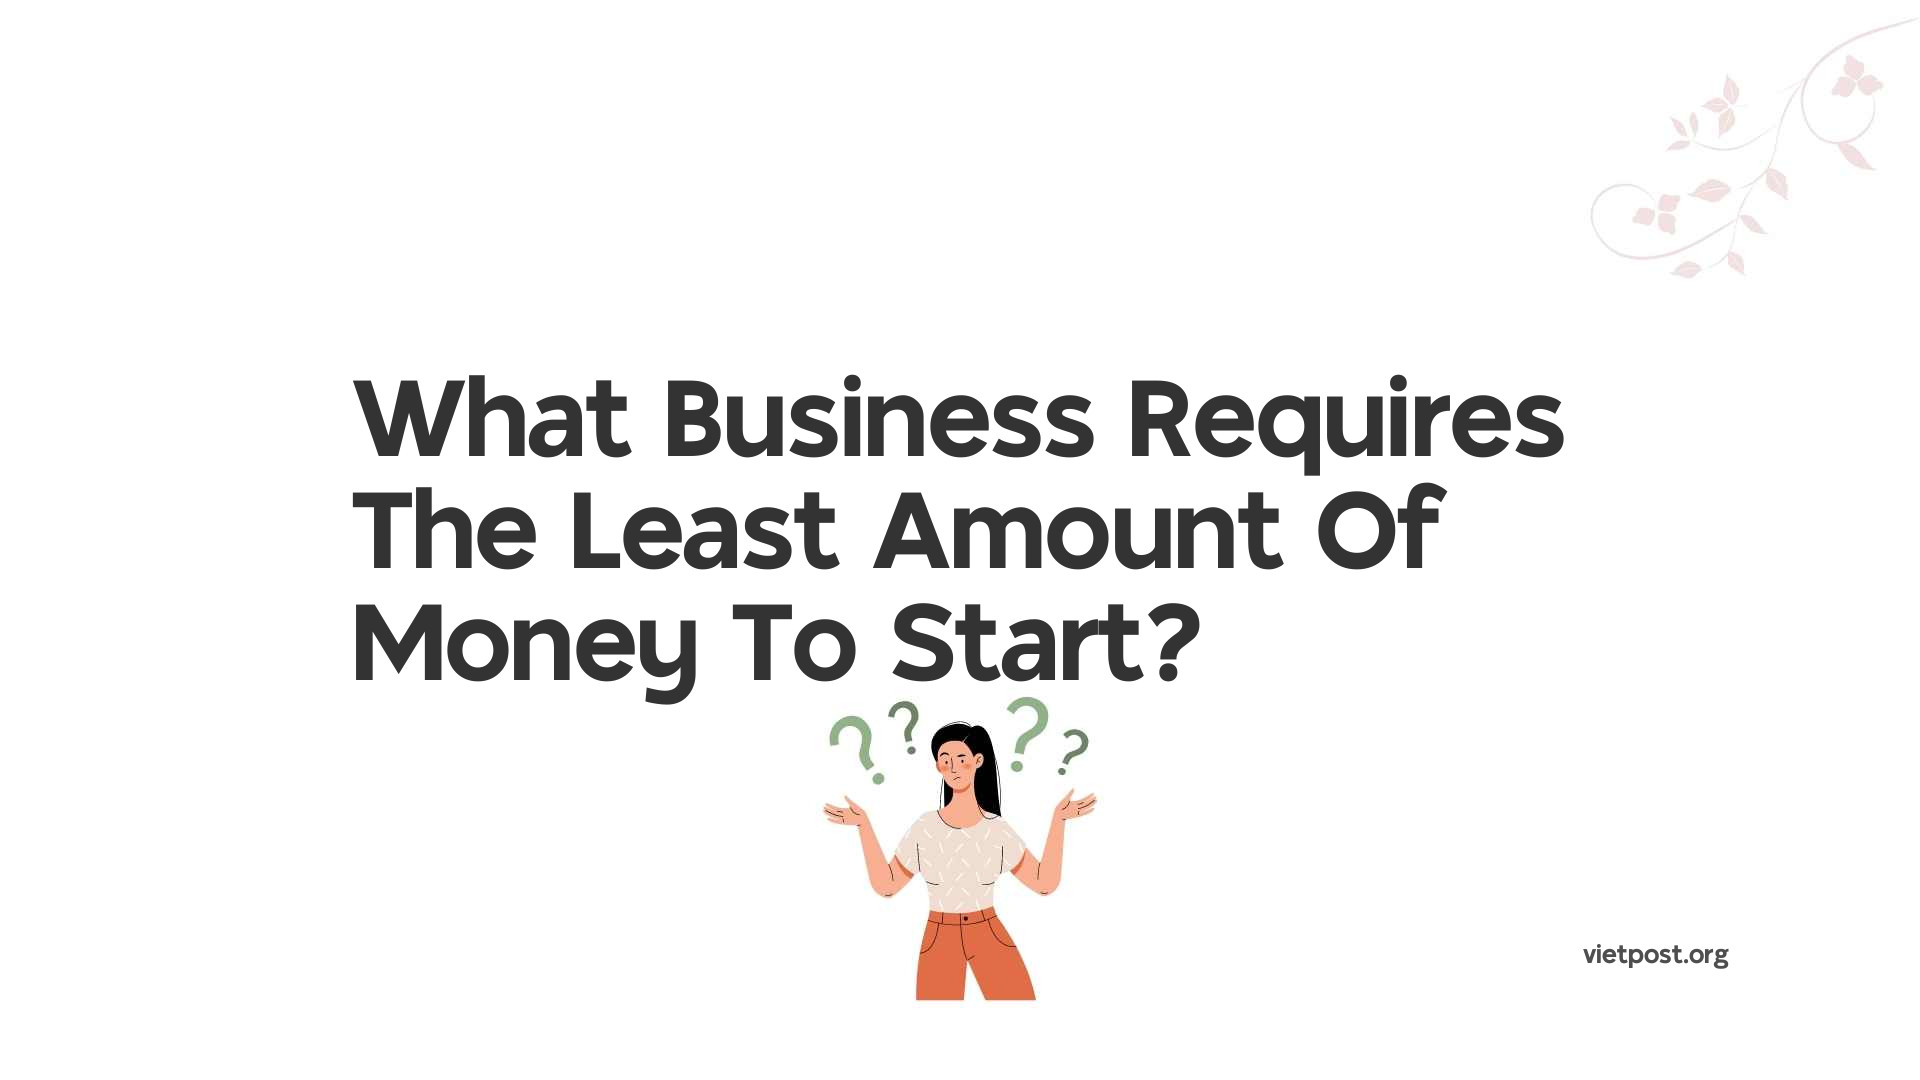 What Business Requires The Least Amount Of Money To Start?